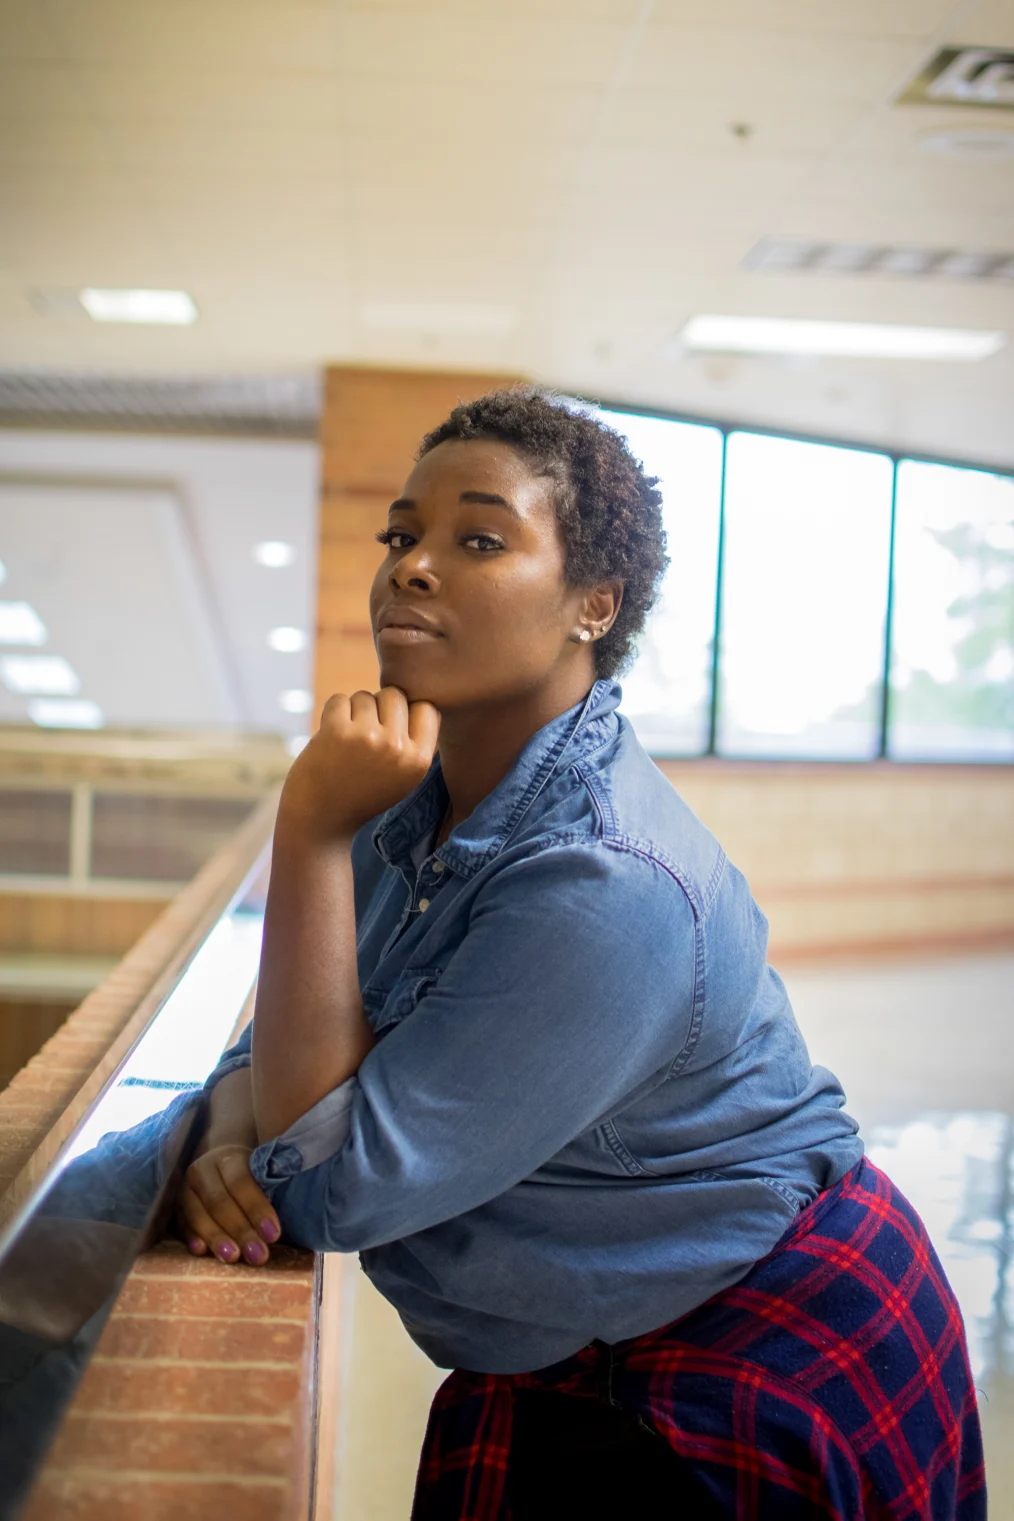 A deep skin toned Black woman with short cut hair is leaning on a short wall with her body turned to the left. She is facing the camera with a straight expression and her left hand in a loose fist under her chin. She is wearing a denim button up shirt with a blue and red flannel tied around her waist, pink nail polish and several earrings in her left ear. The background appears to be a hallway within a building. 